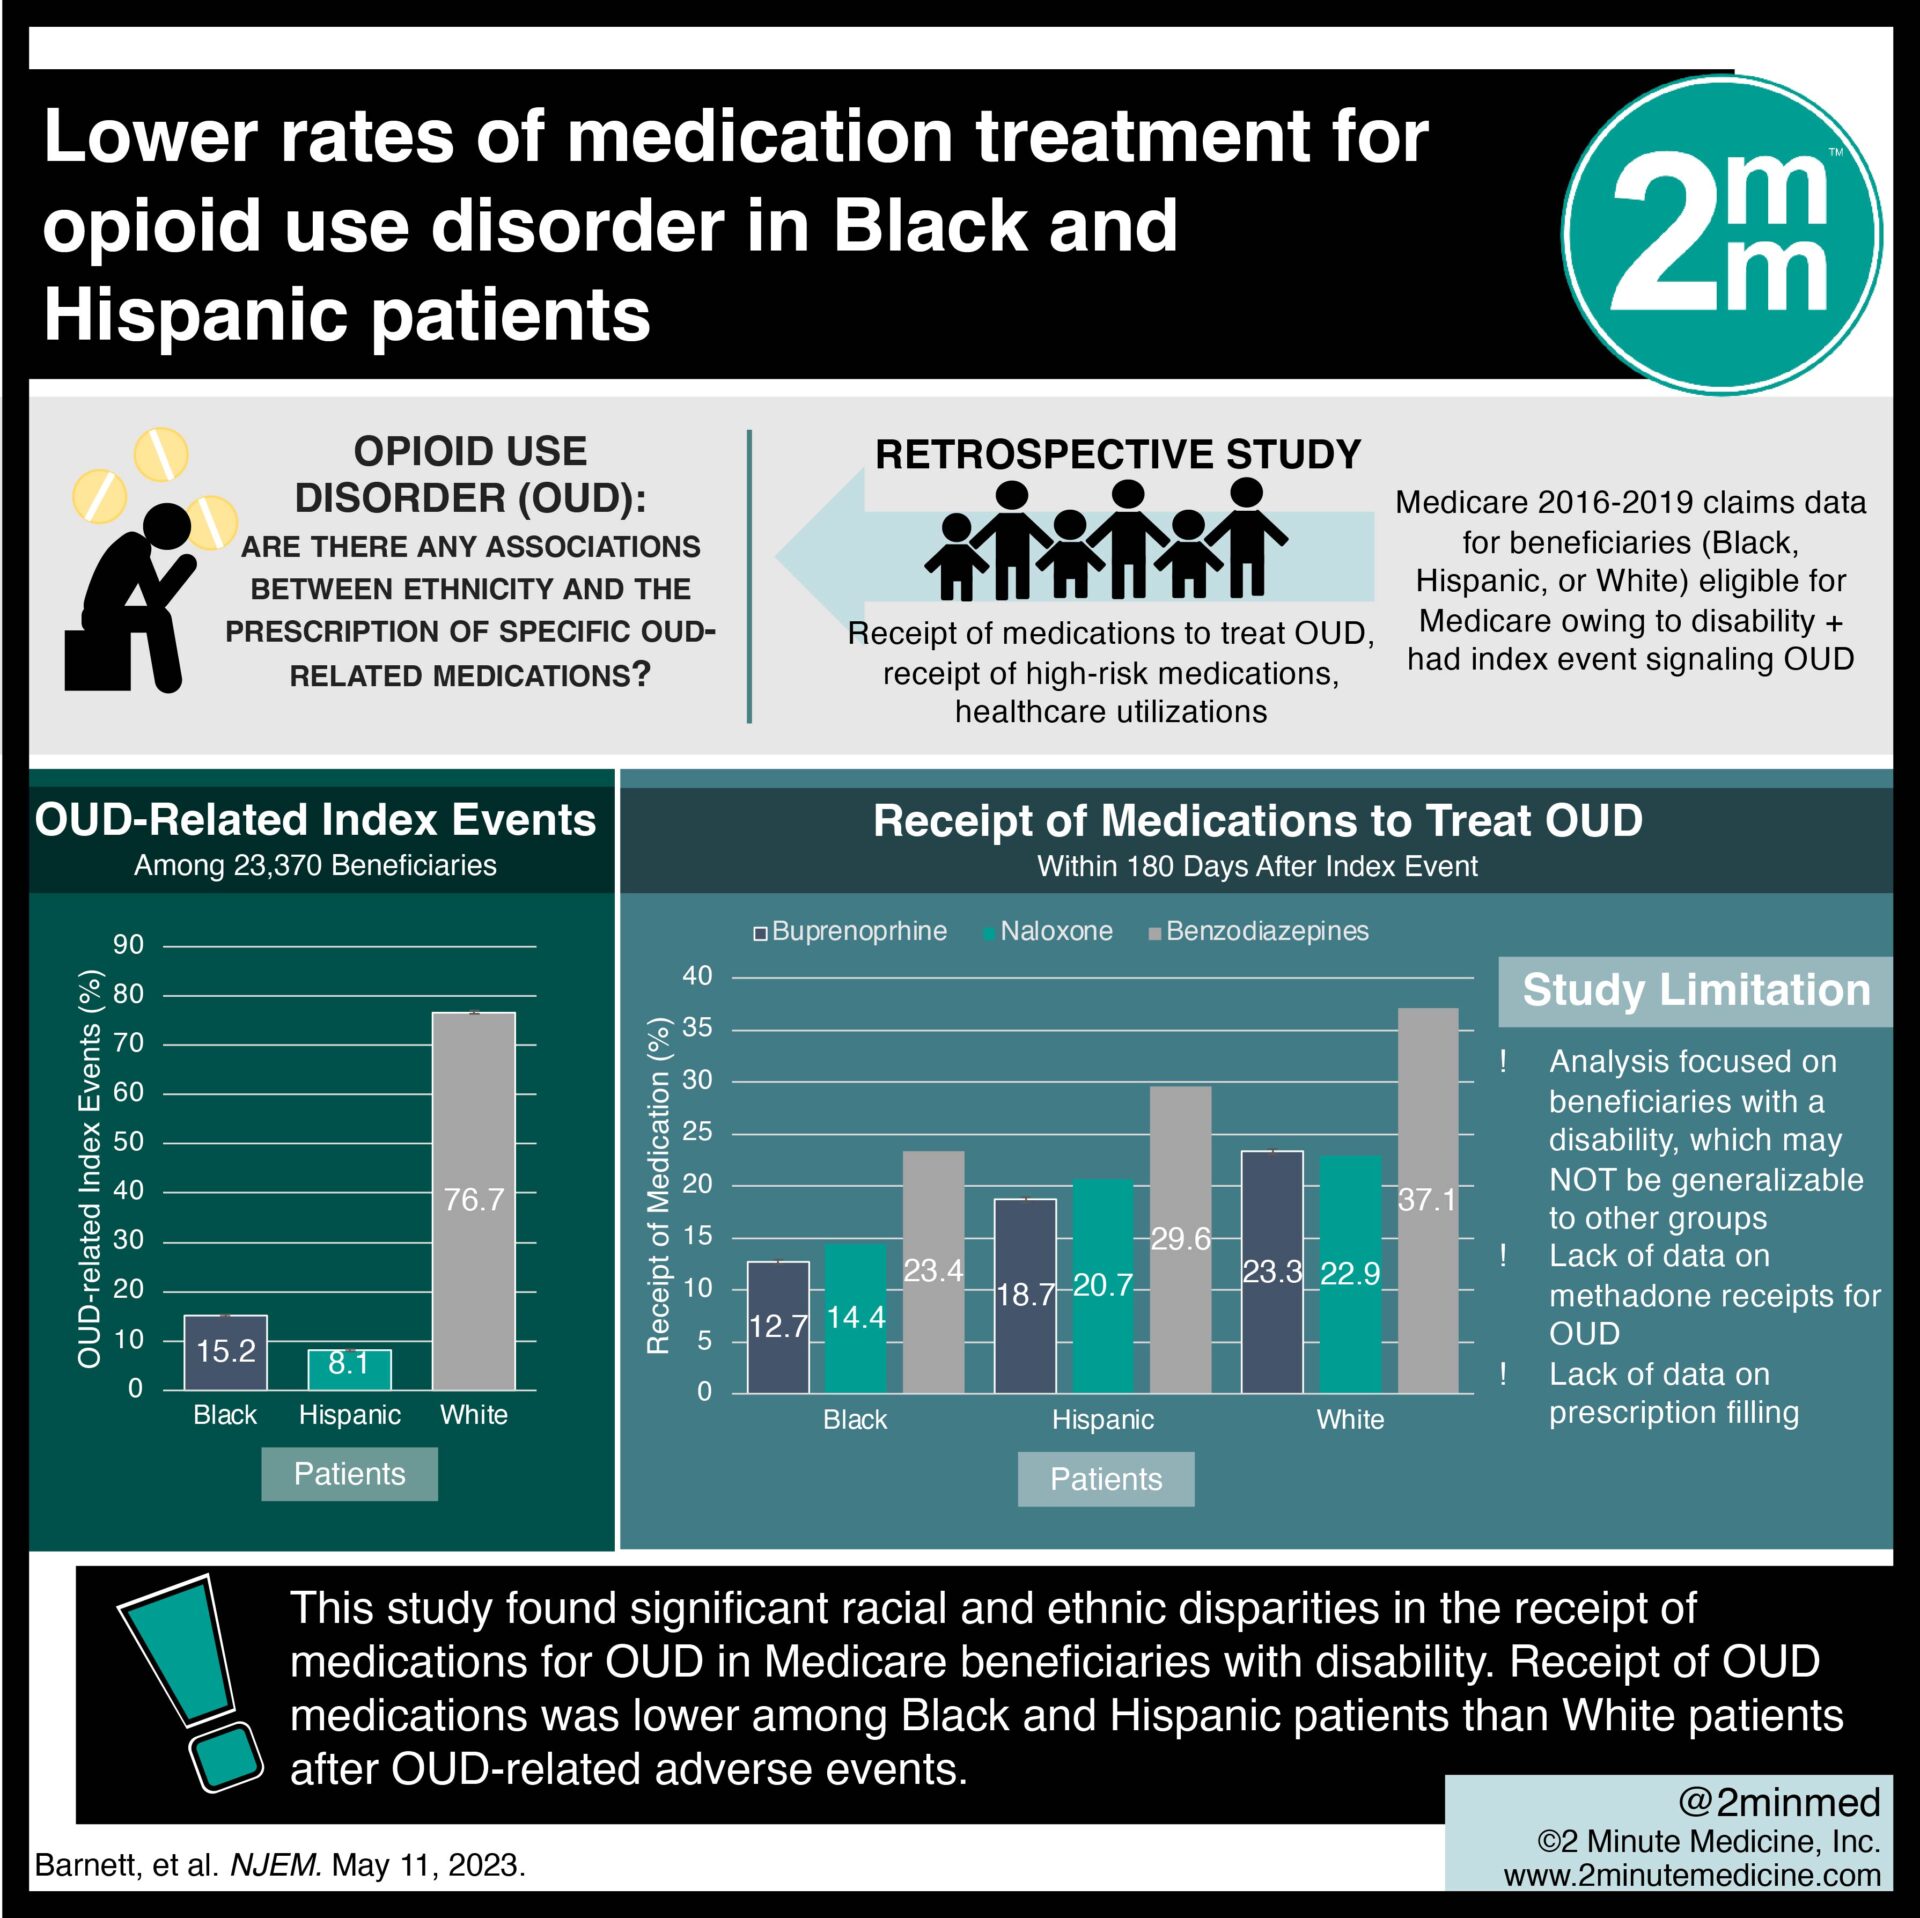 #VisualAbstract: Lower rates of medication treatment for opioid use disorder in Black and Hispanic patients